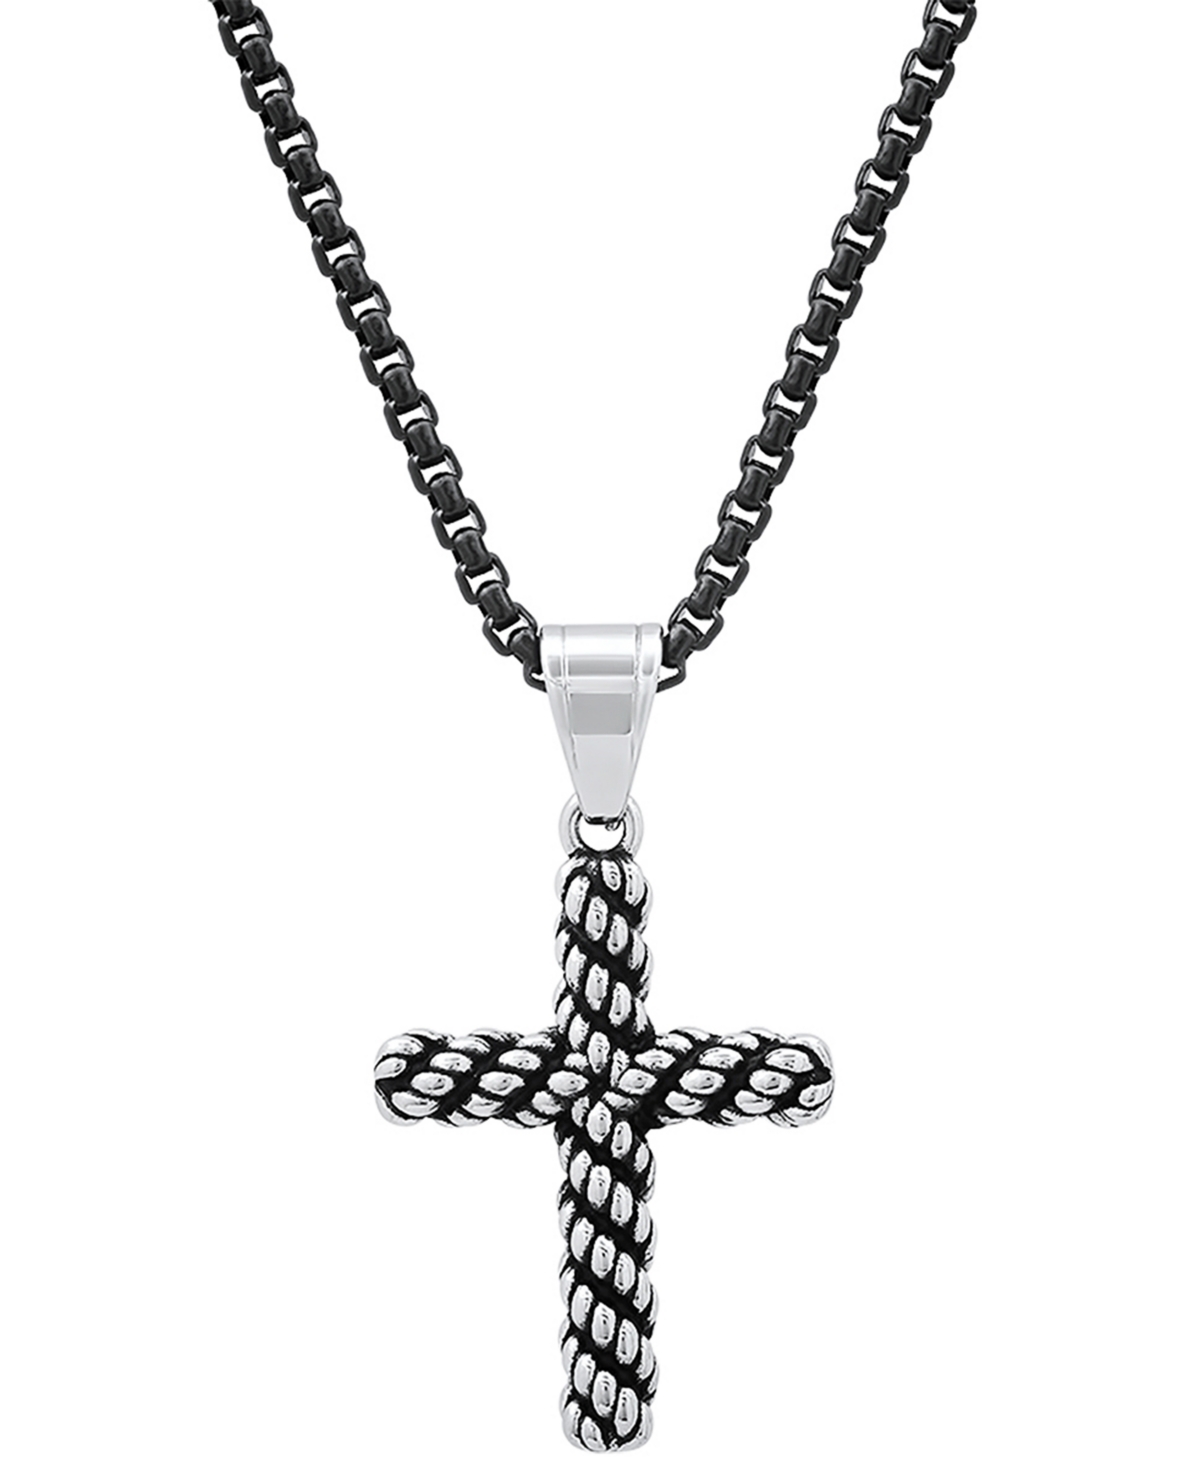 Men's Two-Tone Stainless Steel Rope Chain Cross 24" Pendant Necklace - Black, Silver